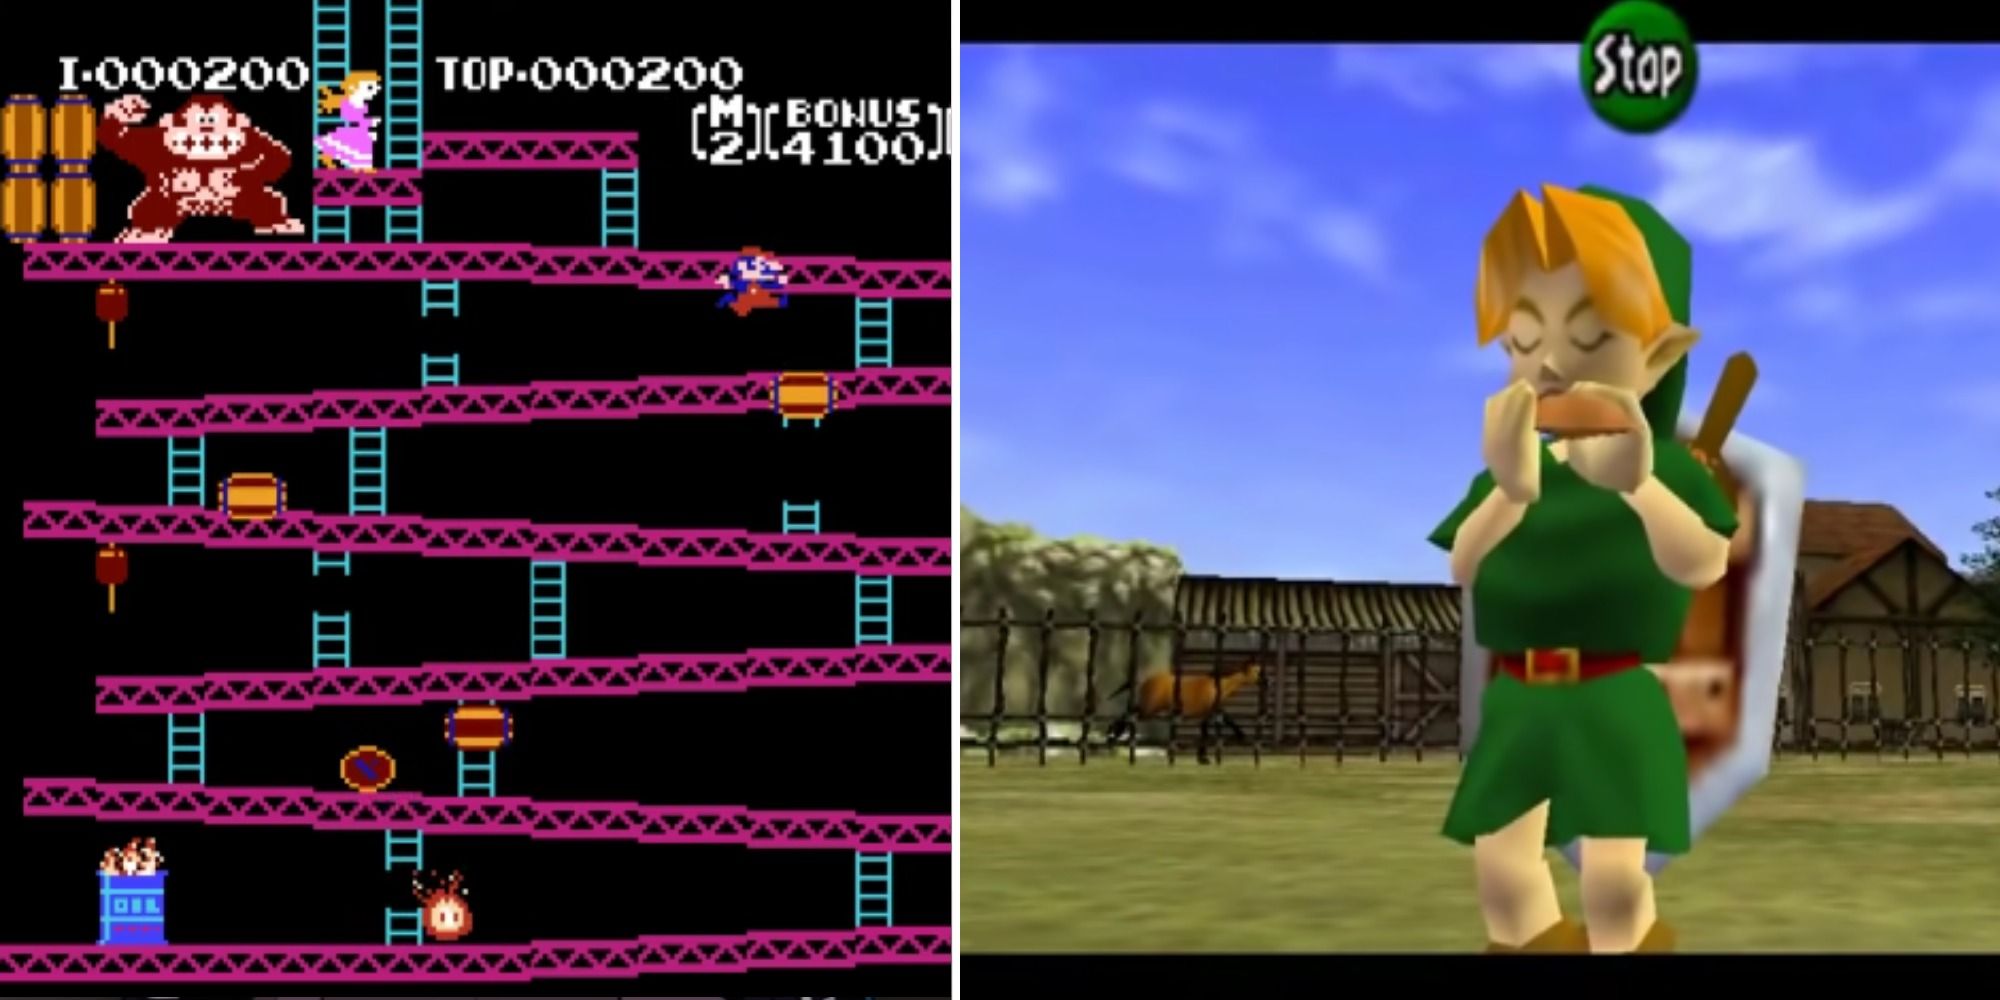 Split image Mario jumping over a barrel in Donkey Kong and Link playing ocarina in The Legend Of Zelda: Ocarina Of Time